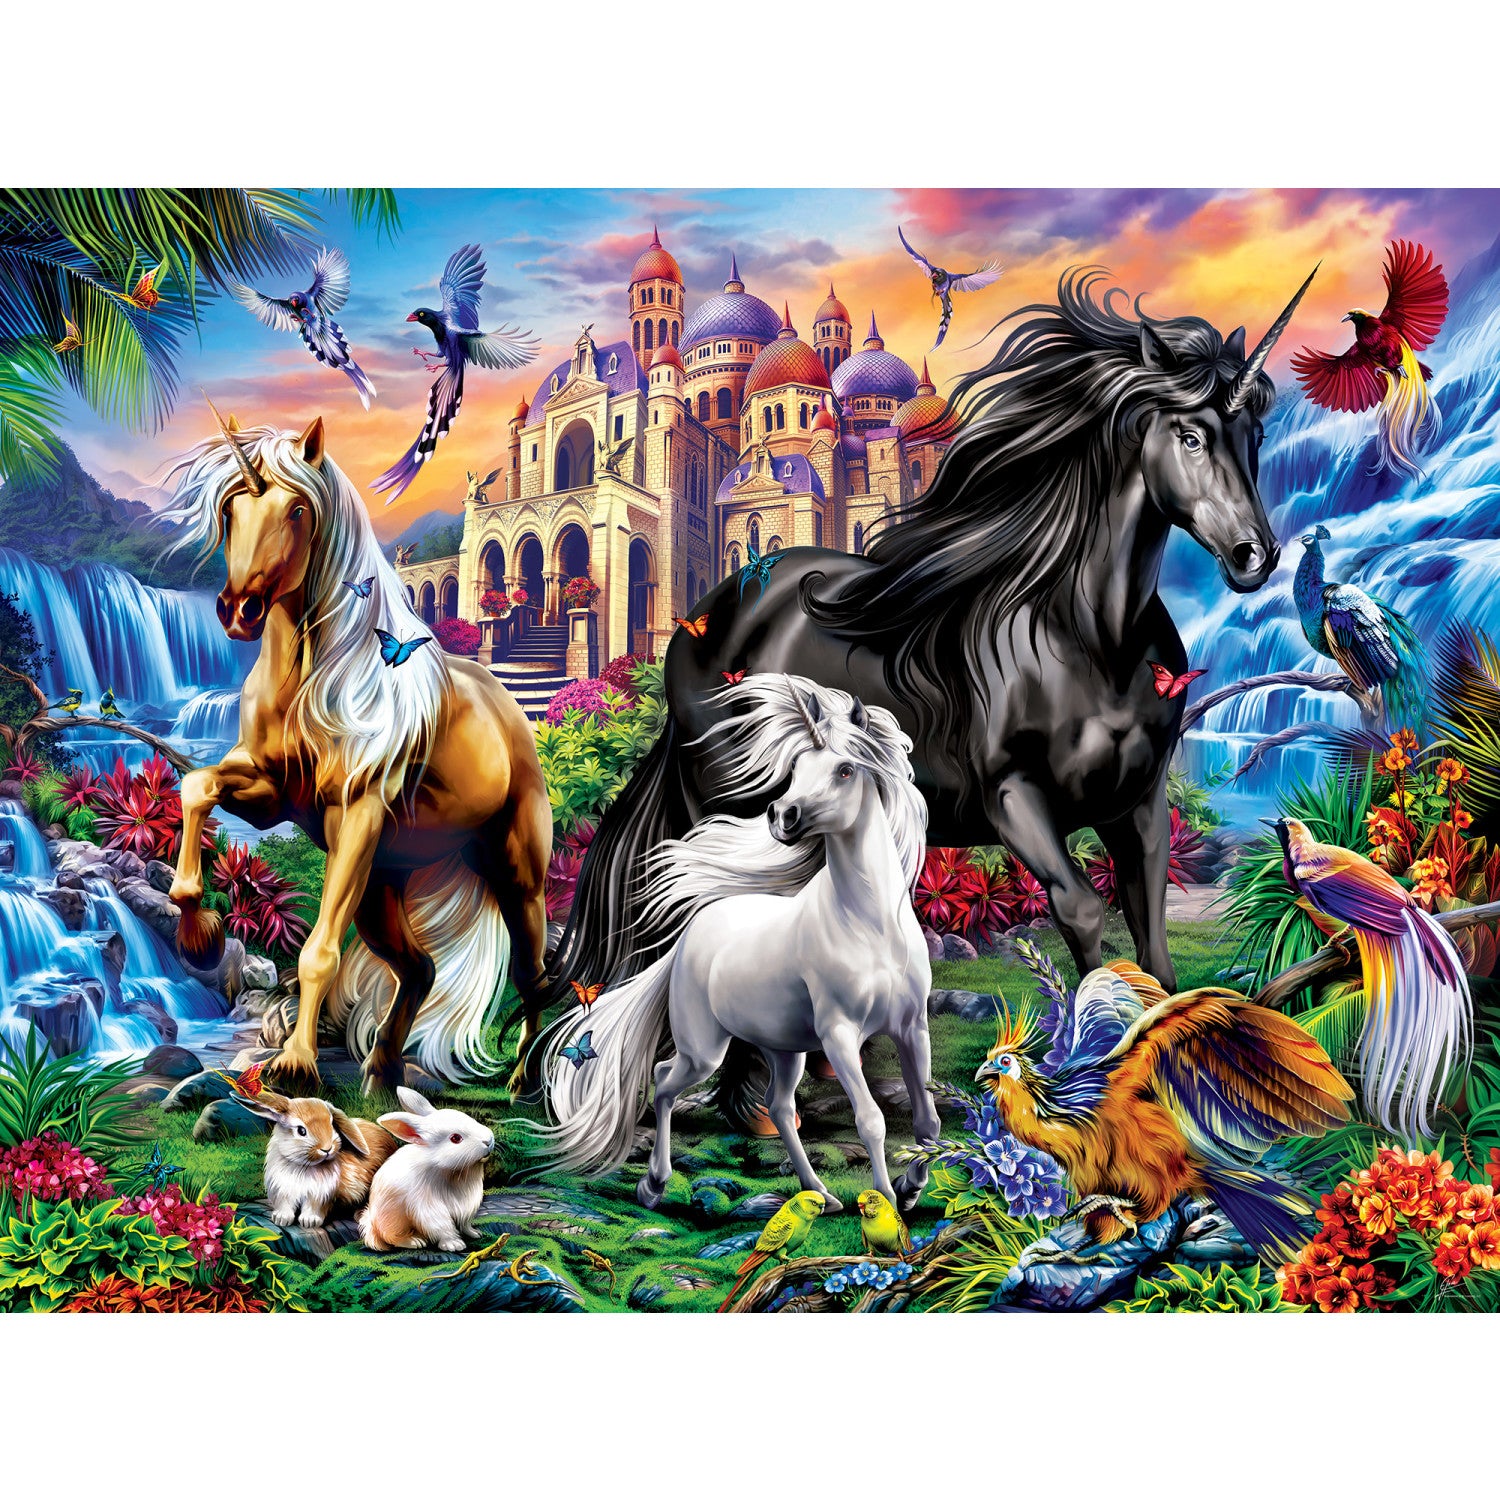 Glow in the Dark - The Young Princess 300 Piece EZ Grip Puzzle